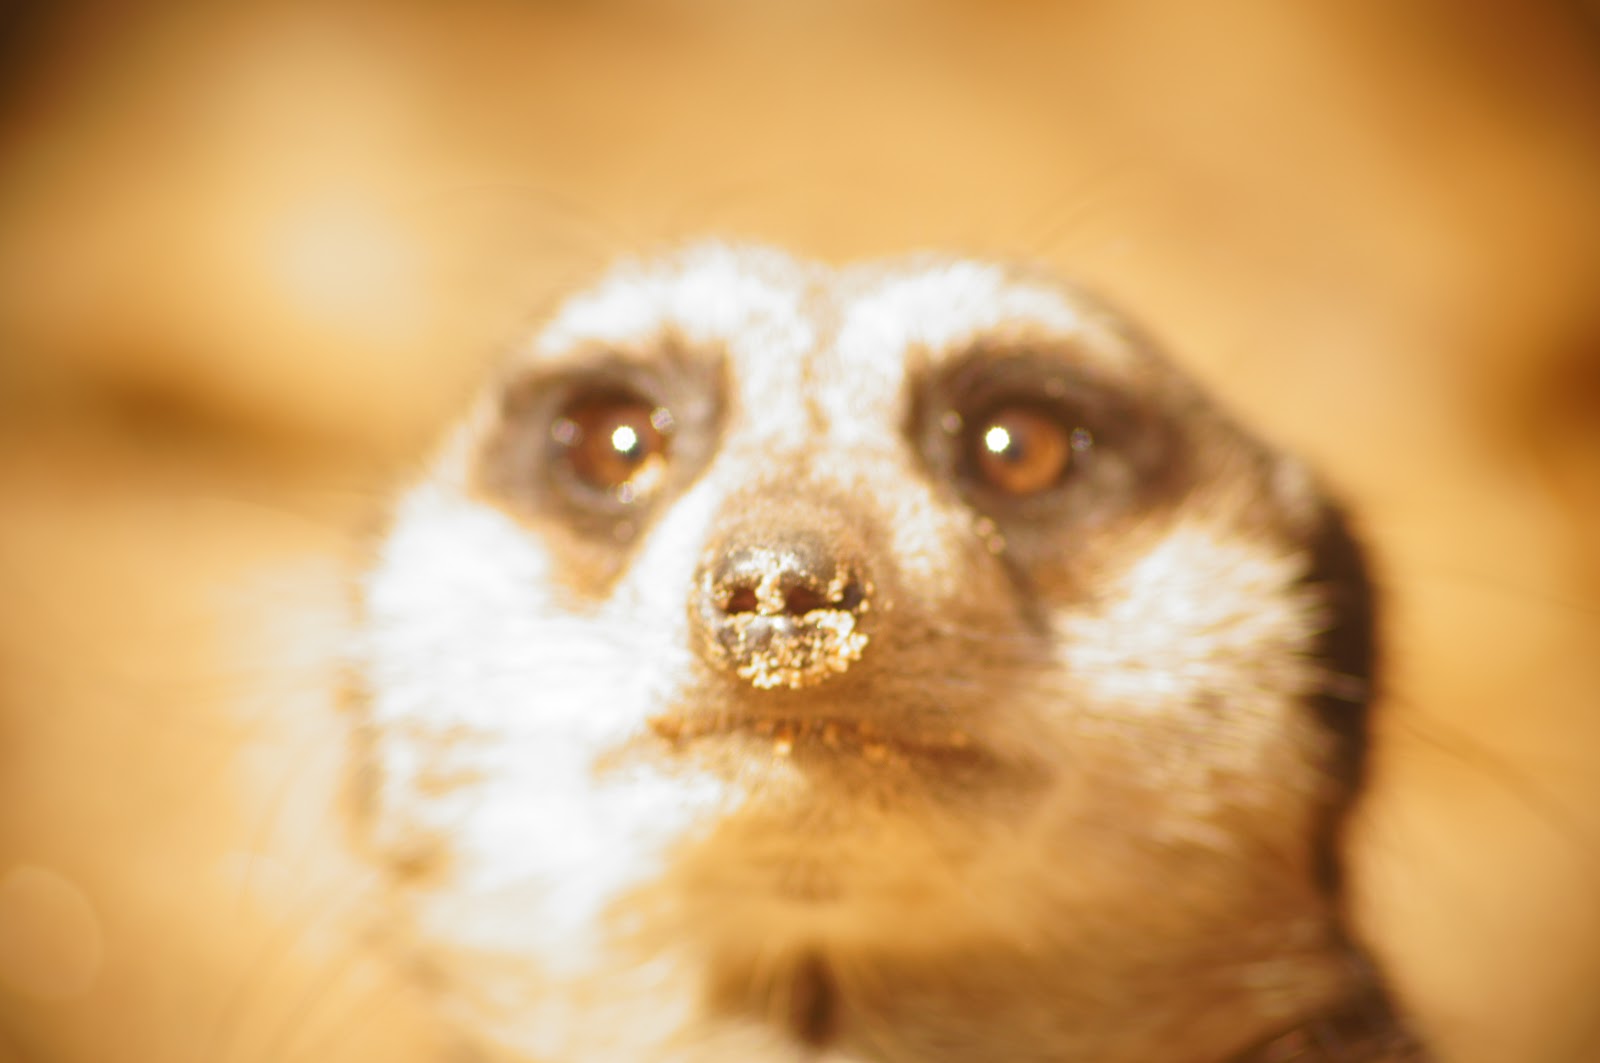 blurred picture of a meerkat